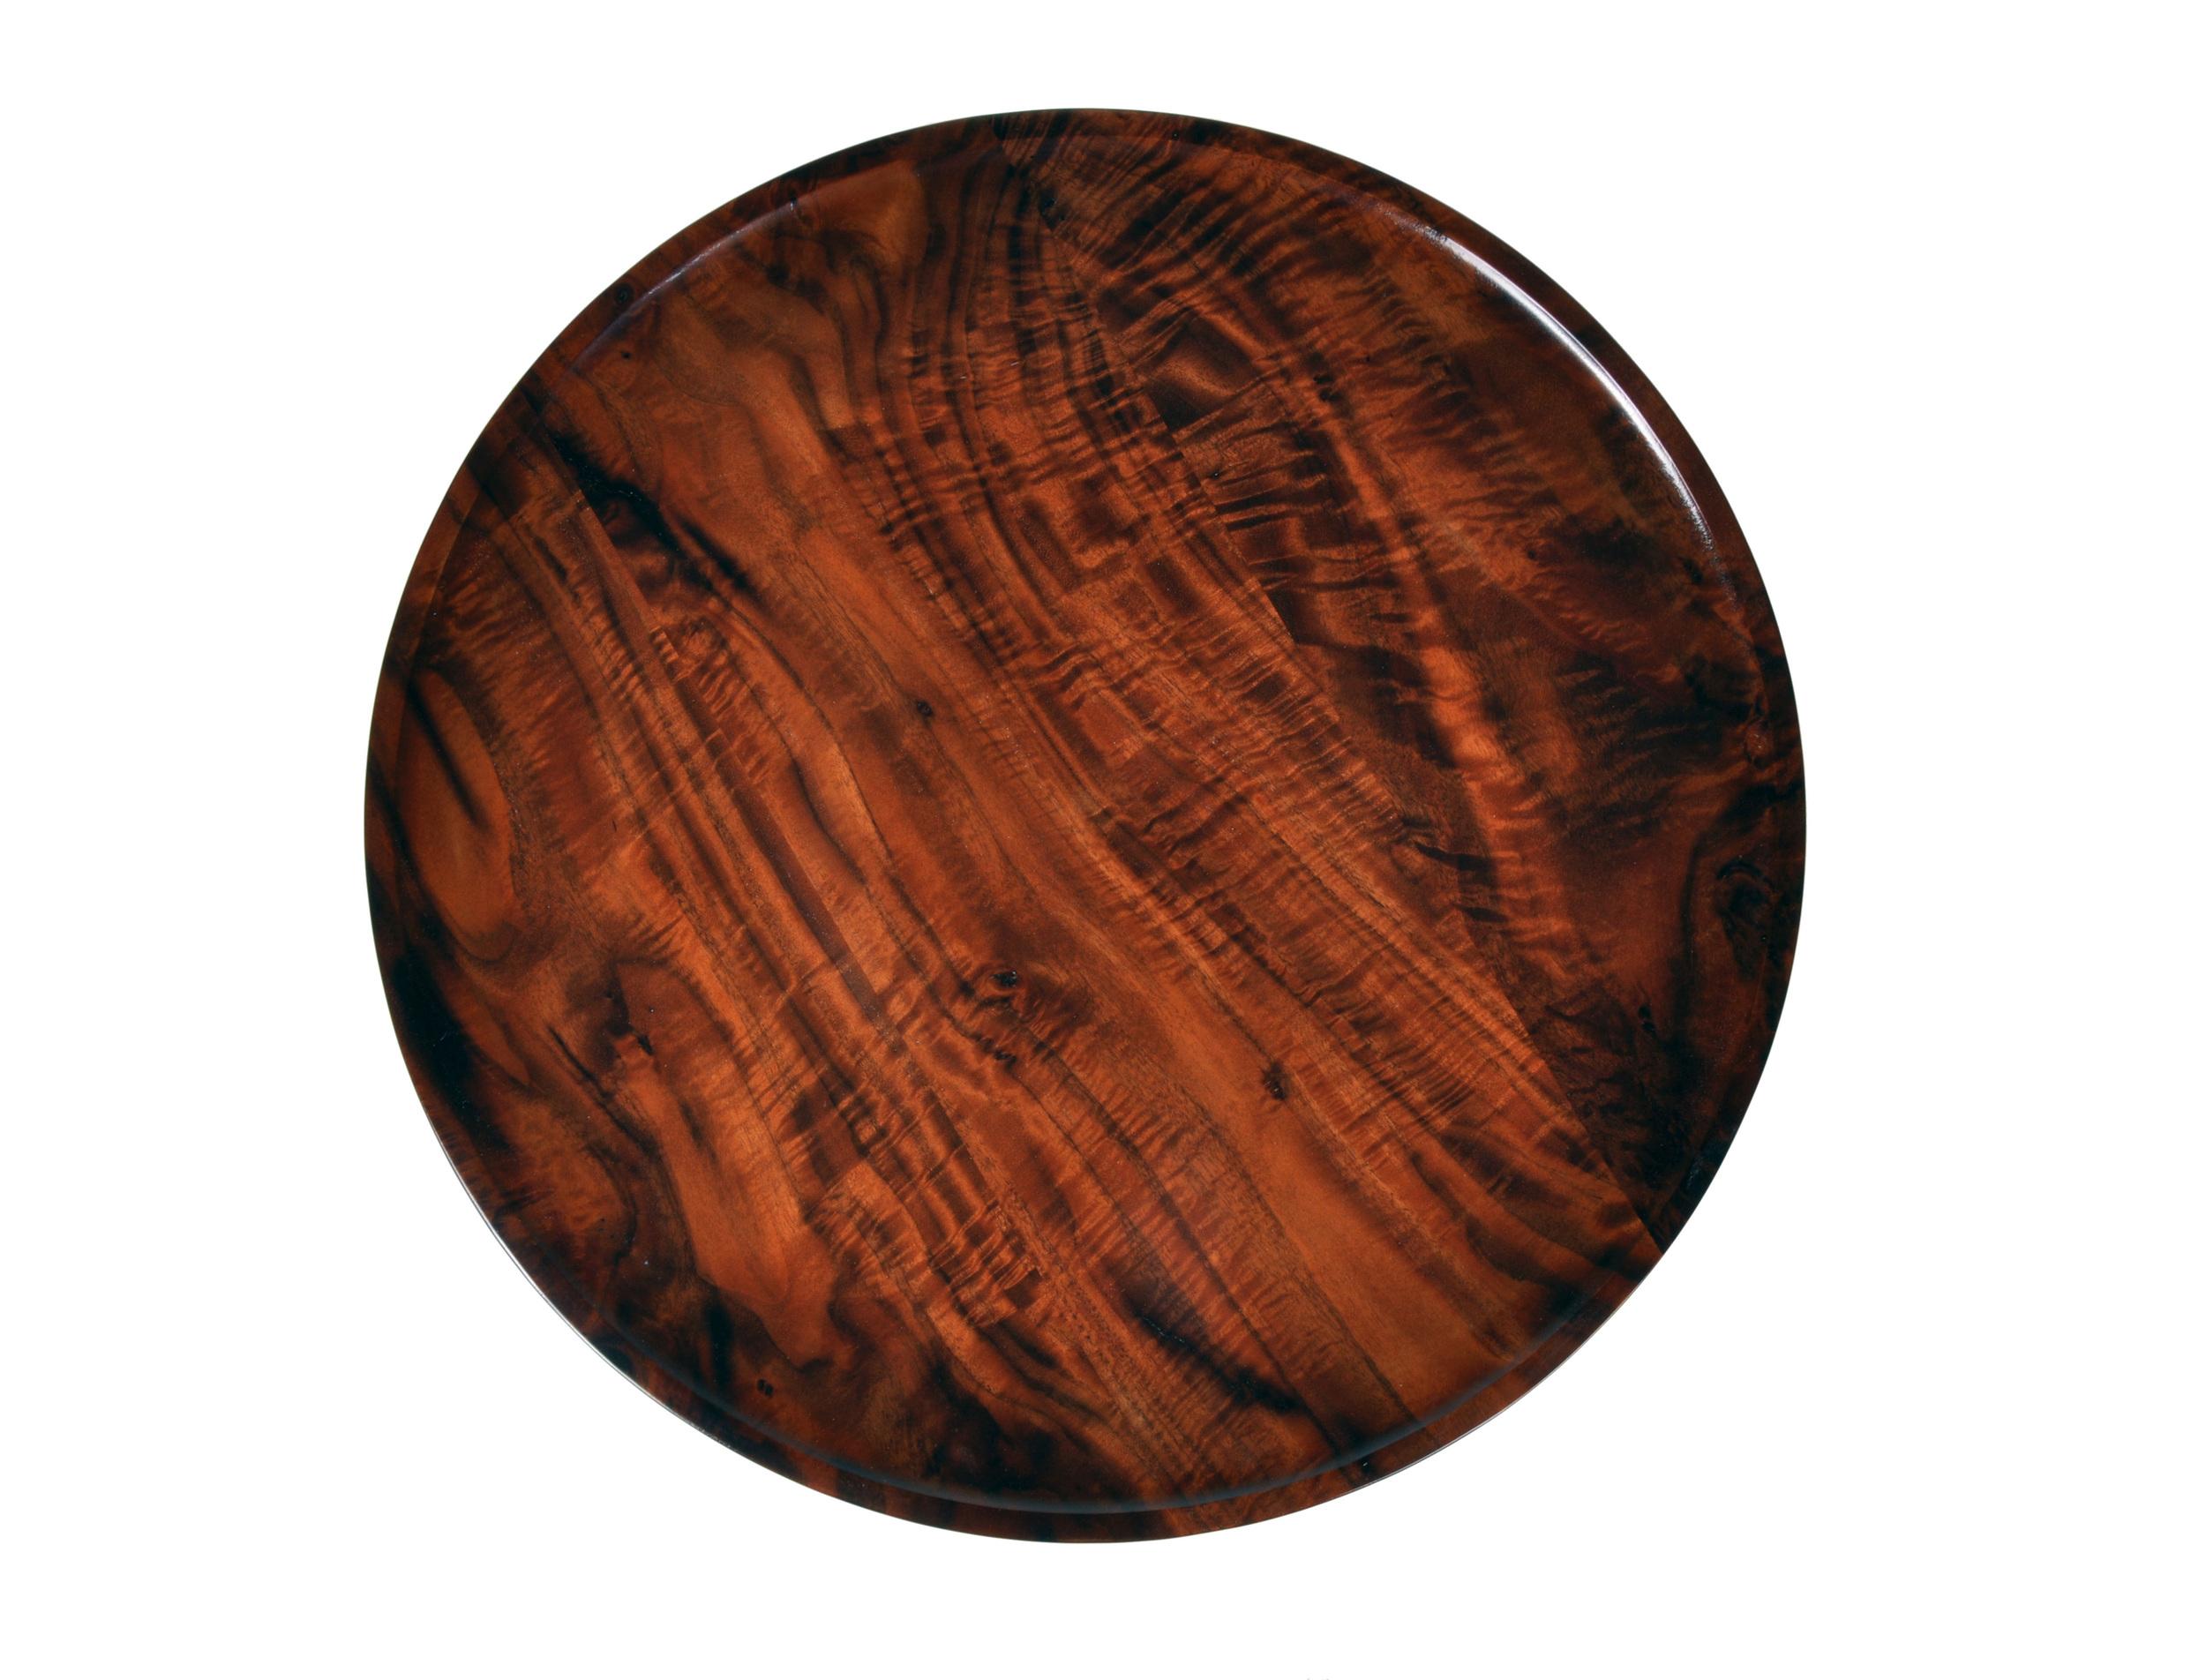 Our Jupiter series mixes art cast bronze bases with hand turned wood orbs and tops. Each base is cast by a foundry that specializes in sculptural bronze work and is hand chased and polished. Our woods are selected from the finest sources for grain,